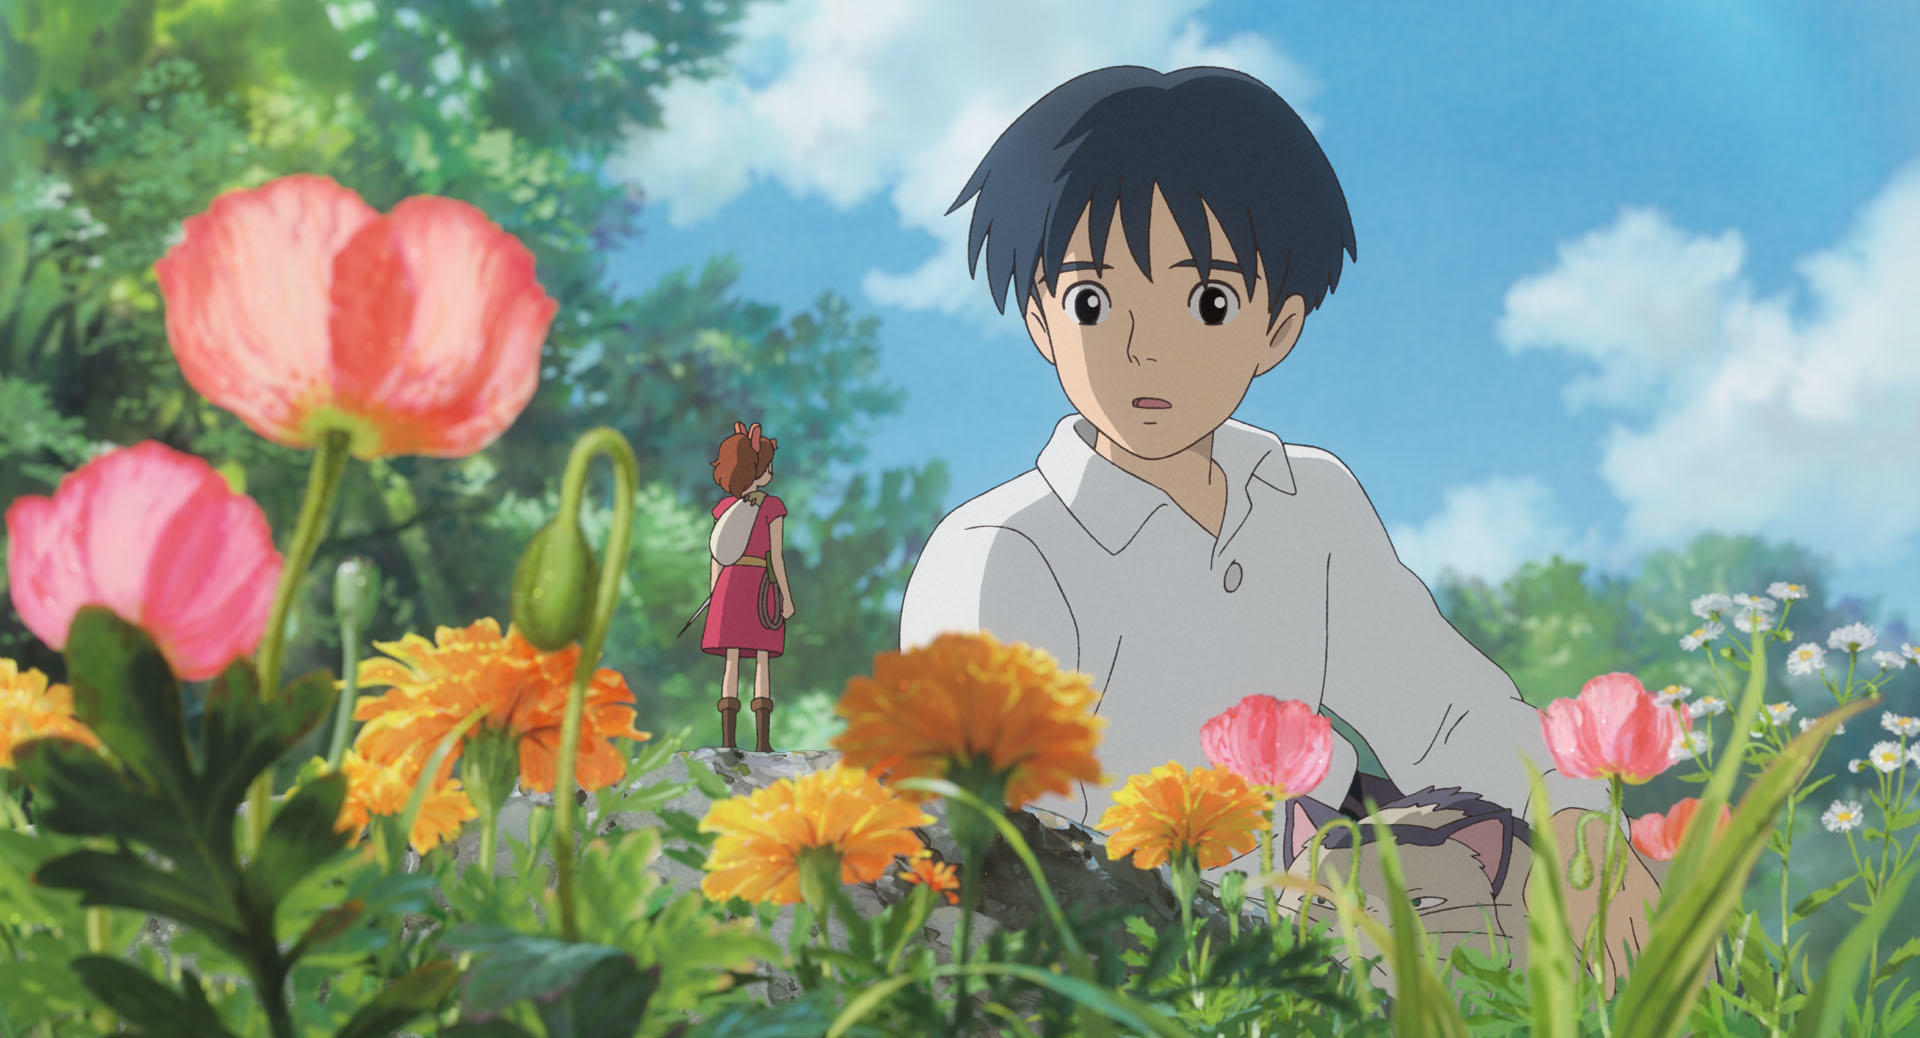 Studio Ghibli releases 400 free image from its best films including 'Spirited Away'